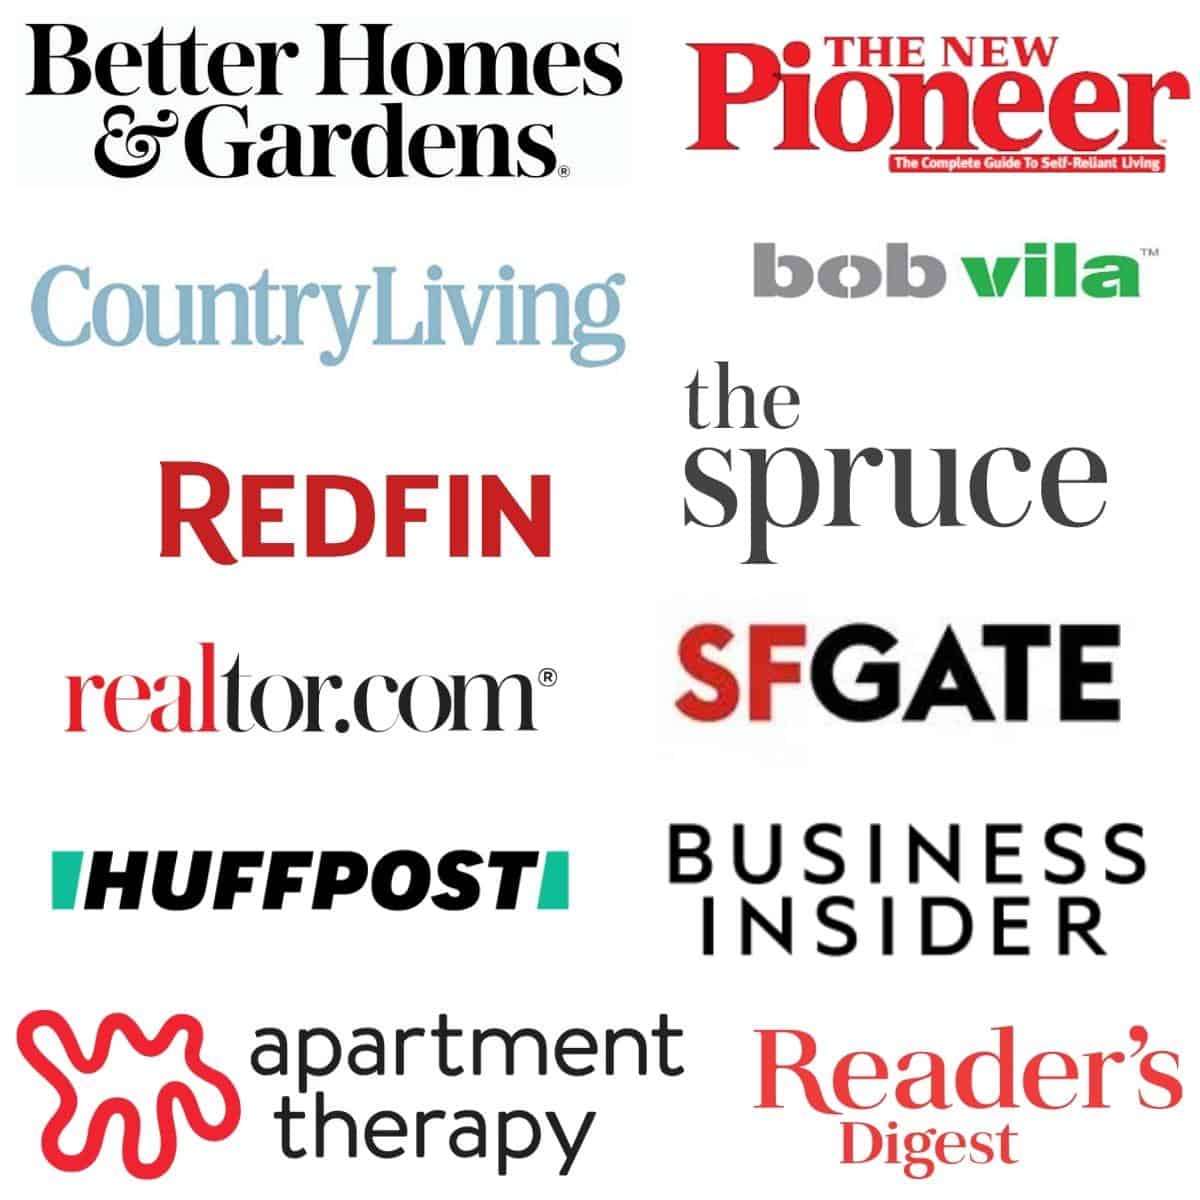 collage of logos of websites and magazines that The Handyman's Daughter has been featured in: Better Homes and Gardens, The New Pioneer, Country Living, Bob Vila, Redfin, the Spruce, realtor.com, SF Gate, Huffington Post, Business Insider, Apartment Therapy and Reader's Digest